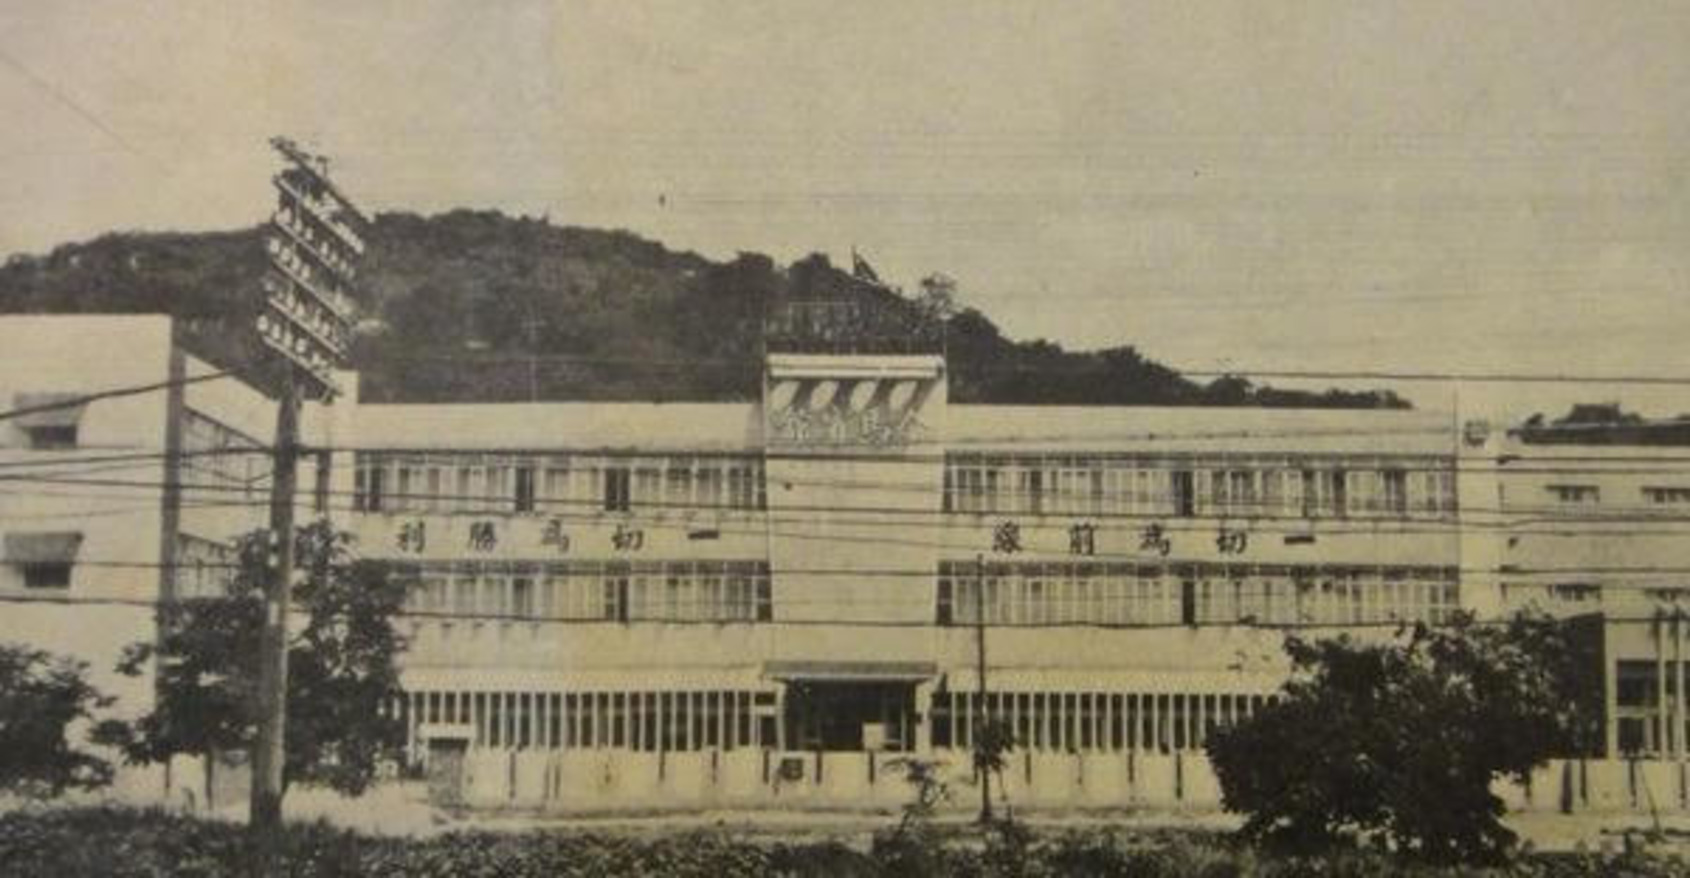  © photo courtesy of The History Museum of Kaohsiung Kinma Military Hostel, a military monument during 1967-1998